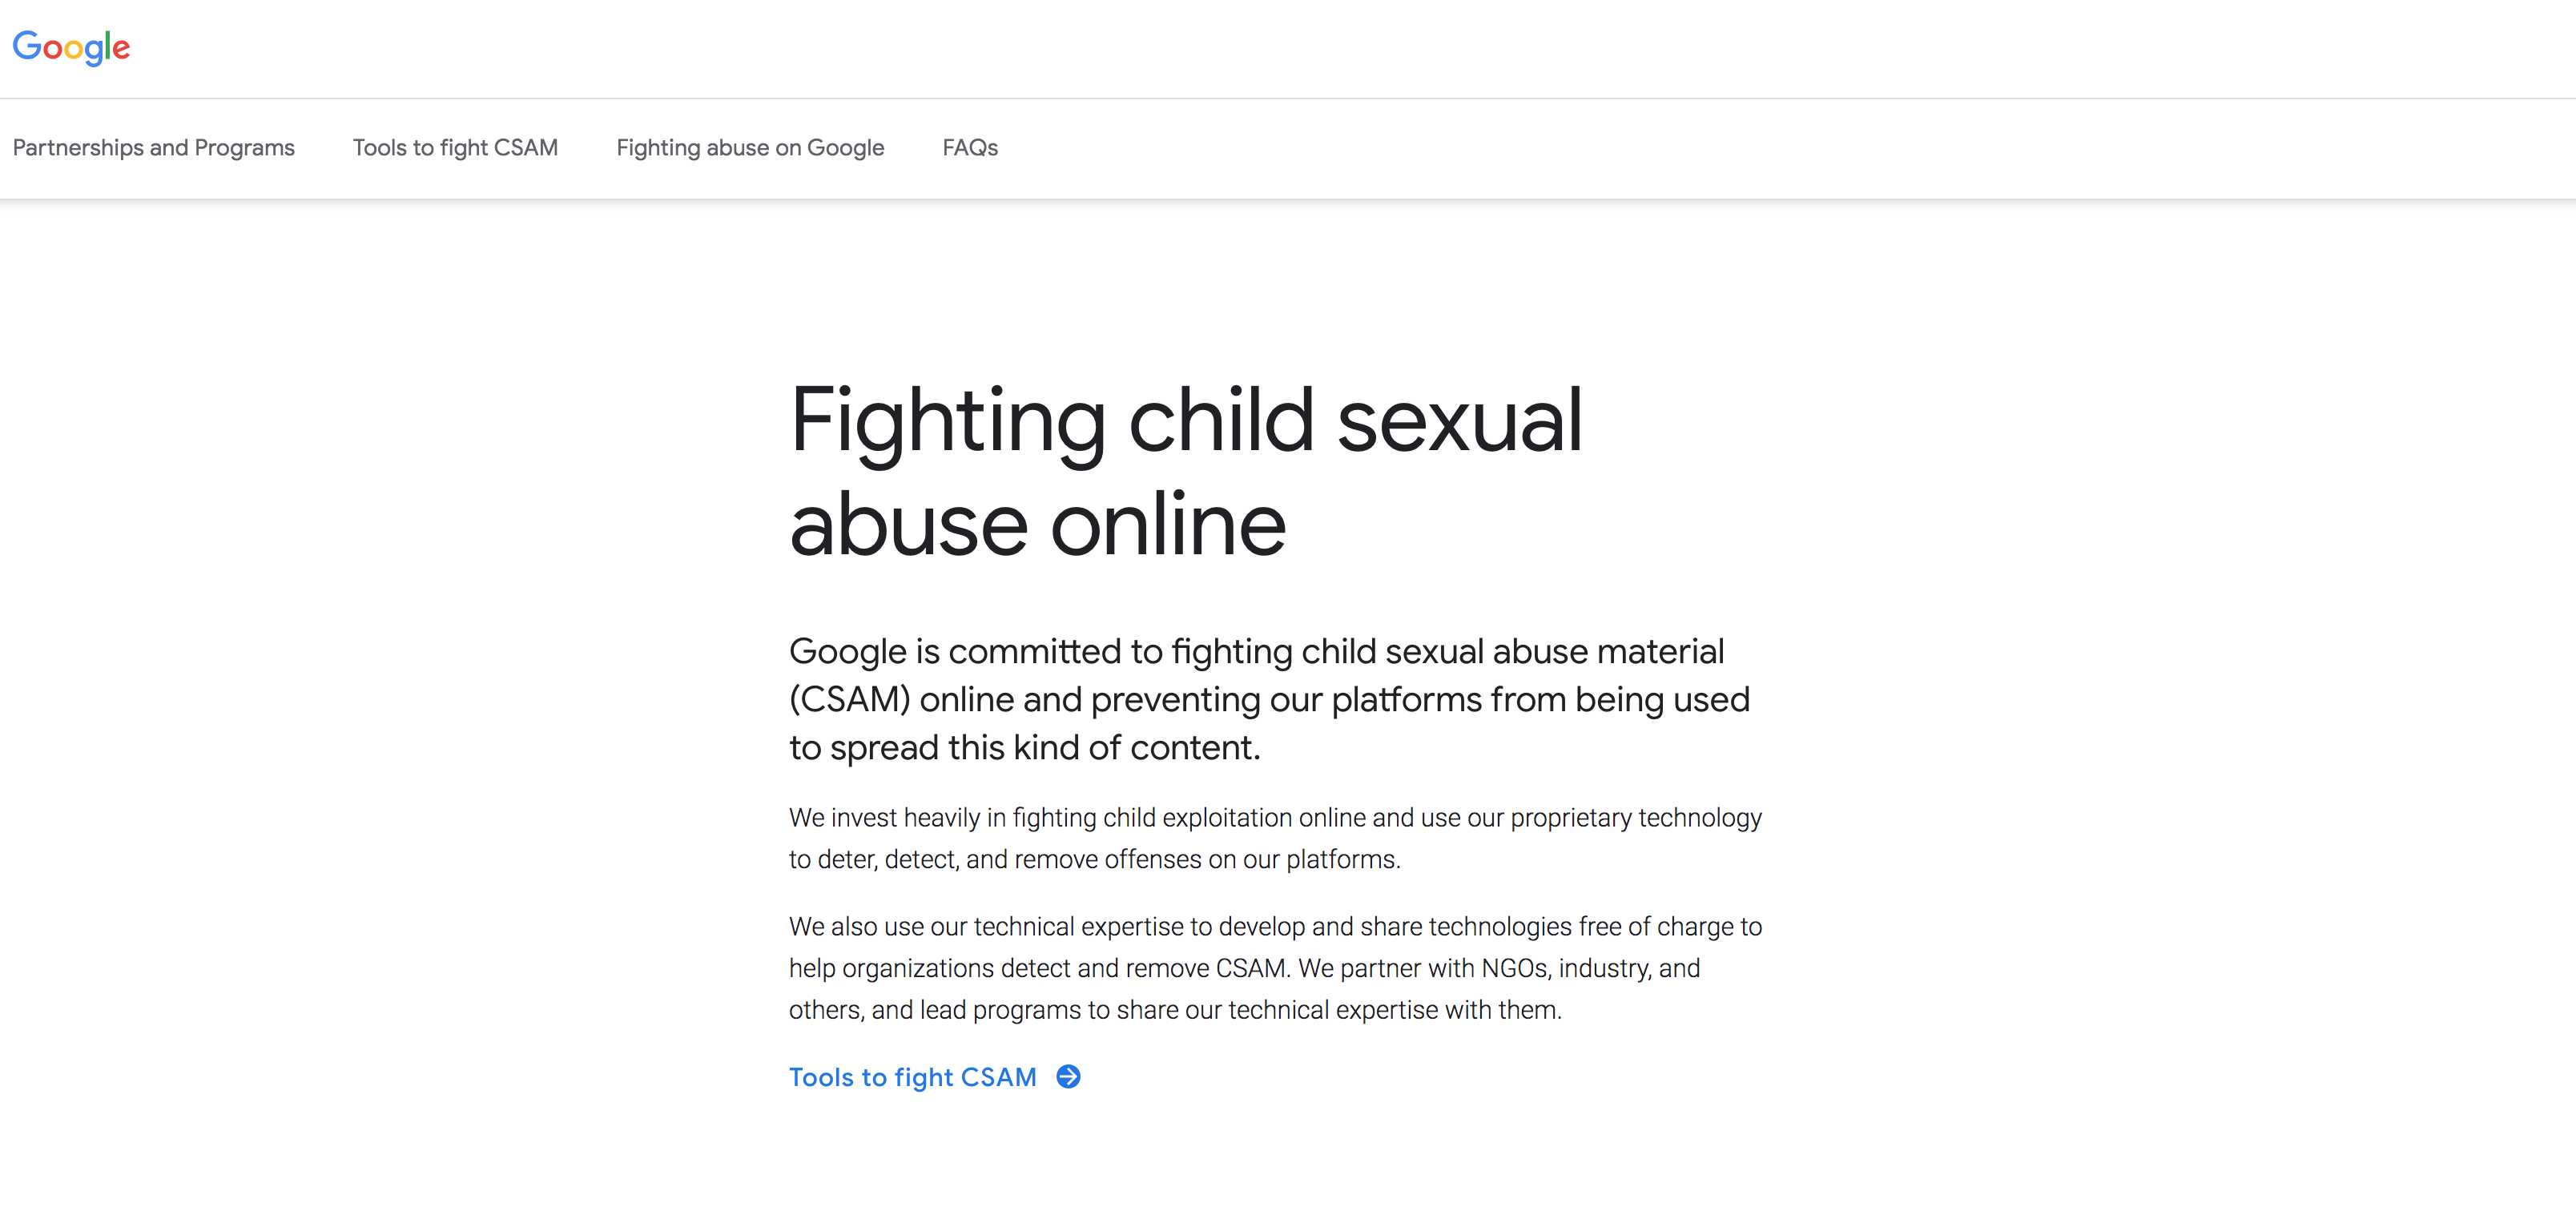 Google's page to announce their approach to combatting online abuse